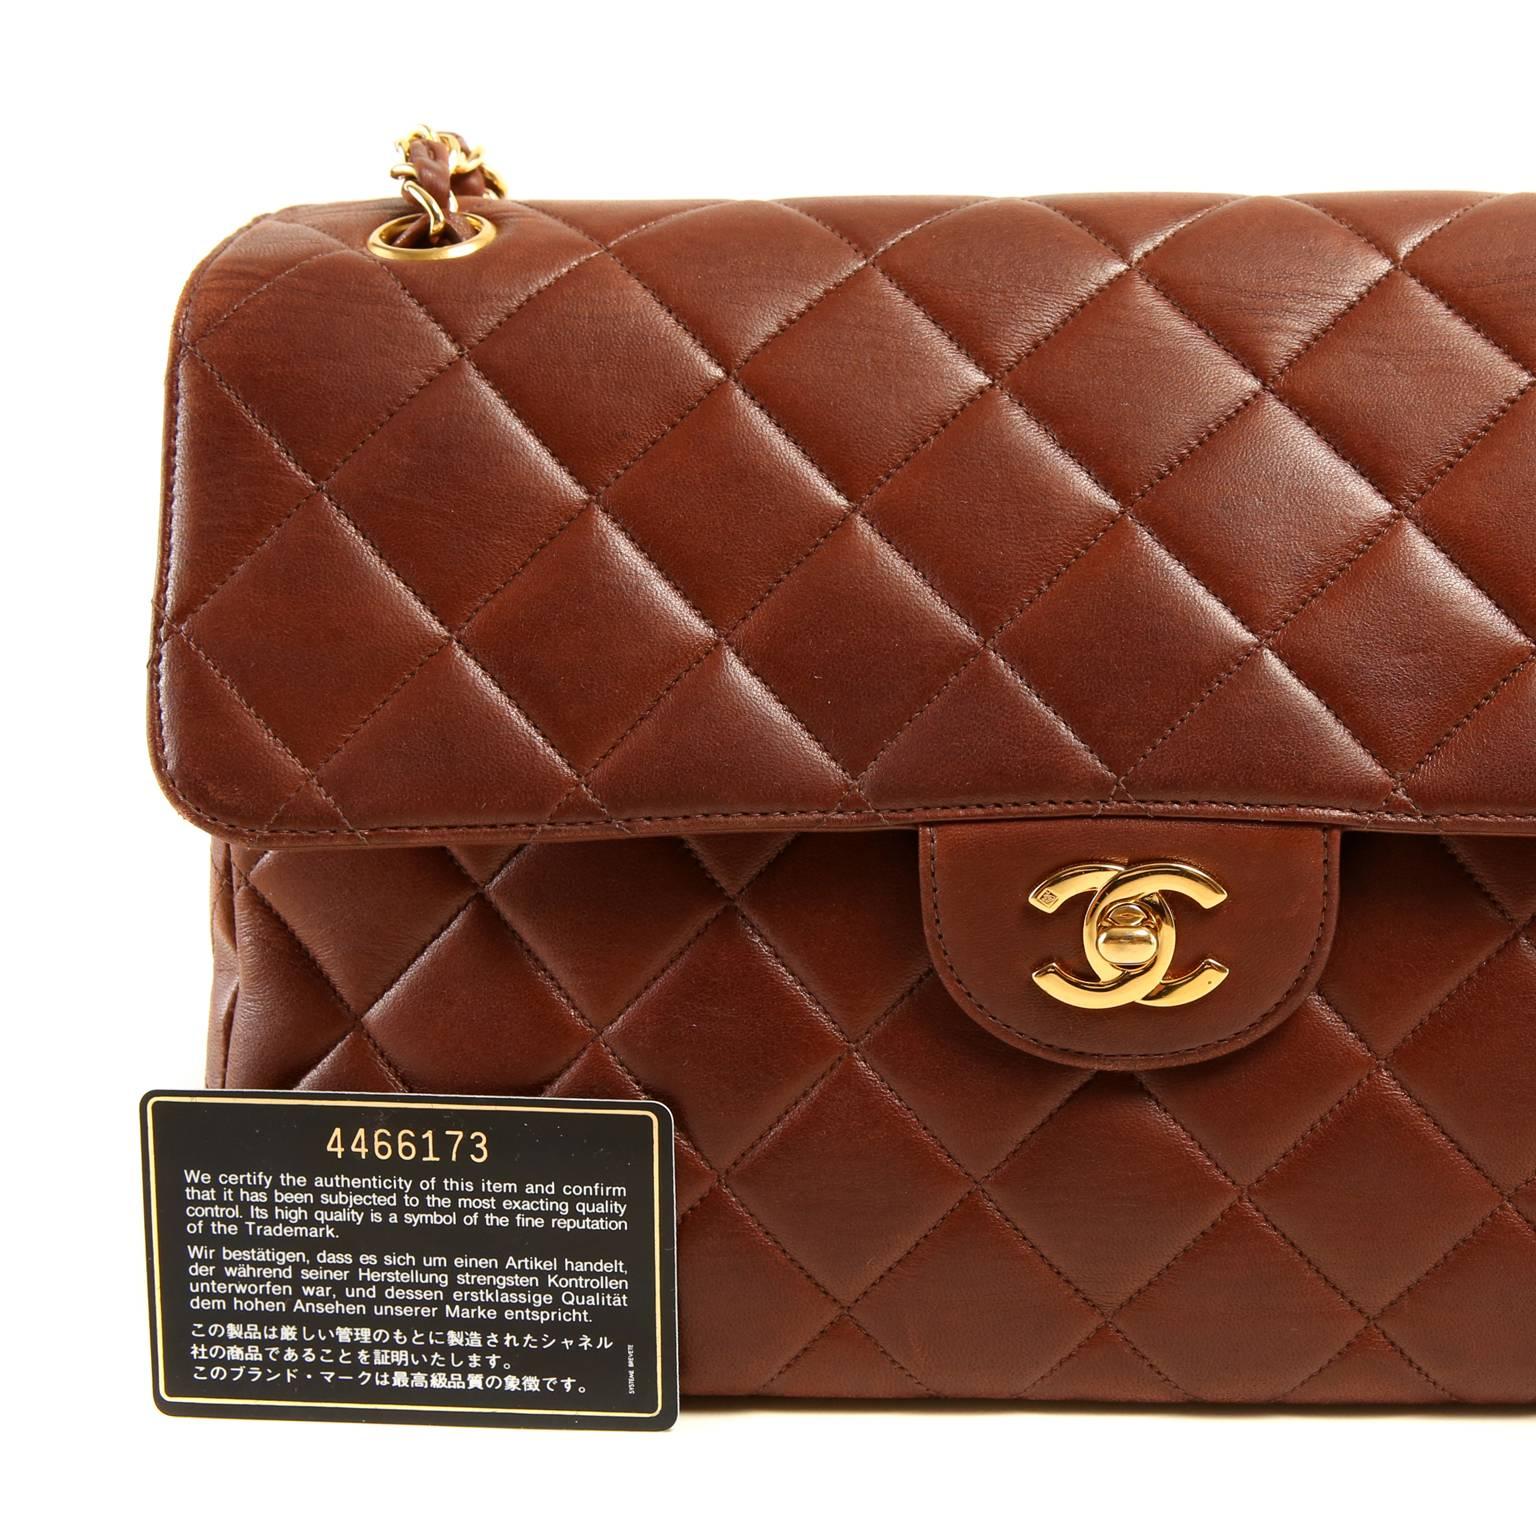 Chanel Brown Leather Double Sided Flap Bag- Gold Hardware 5